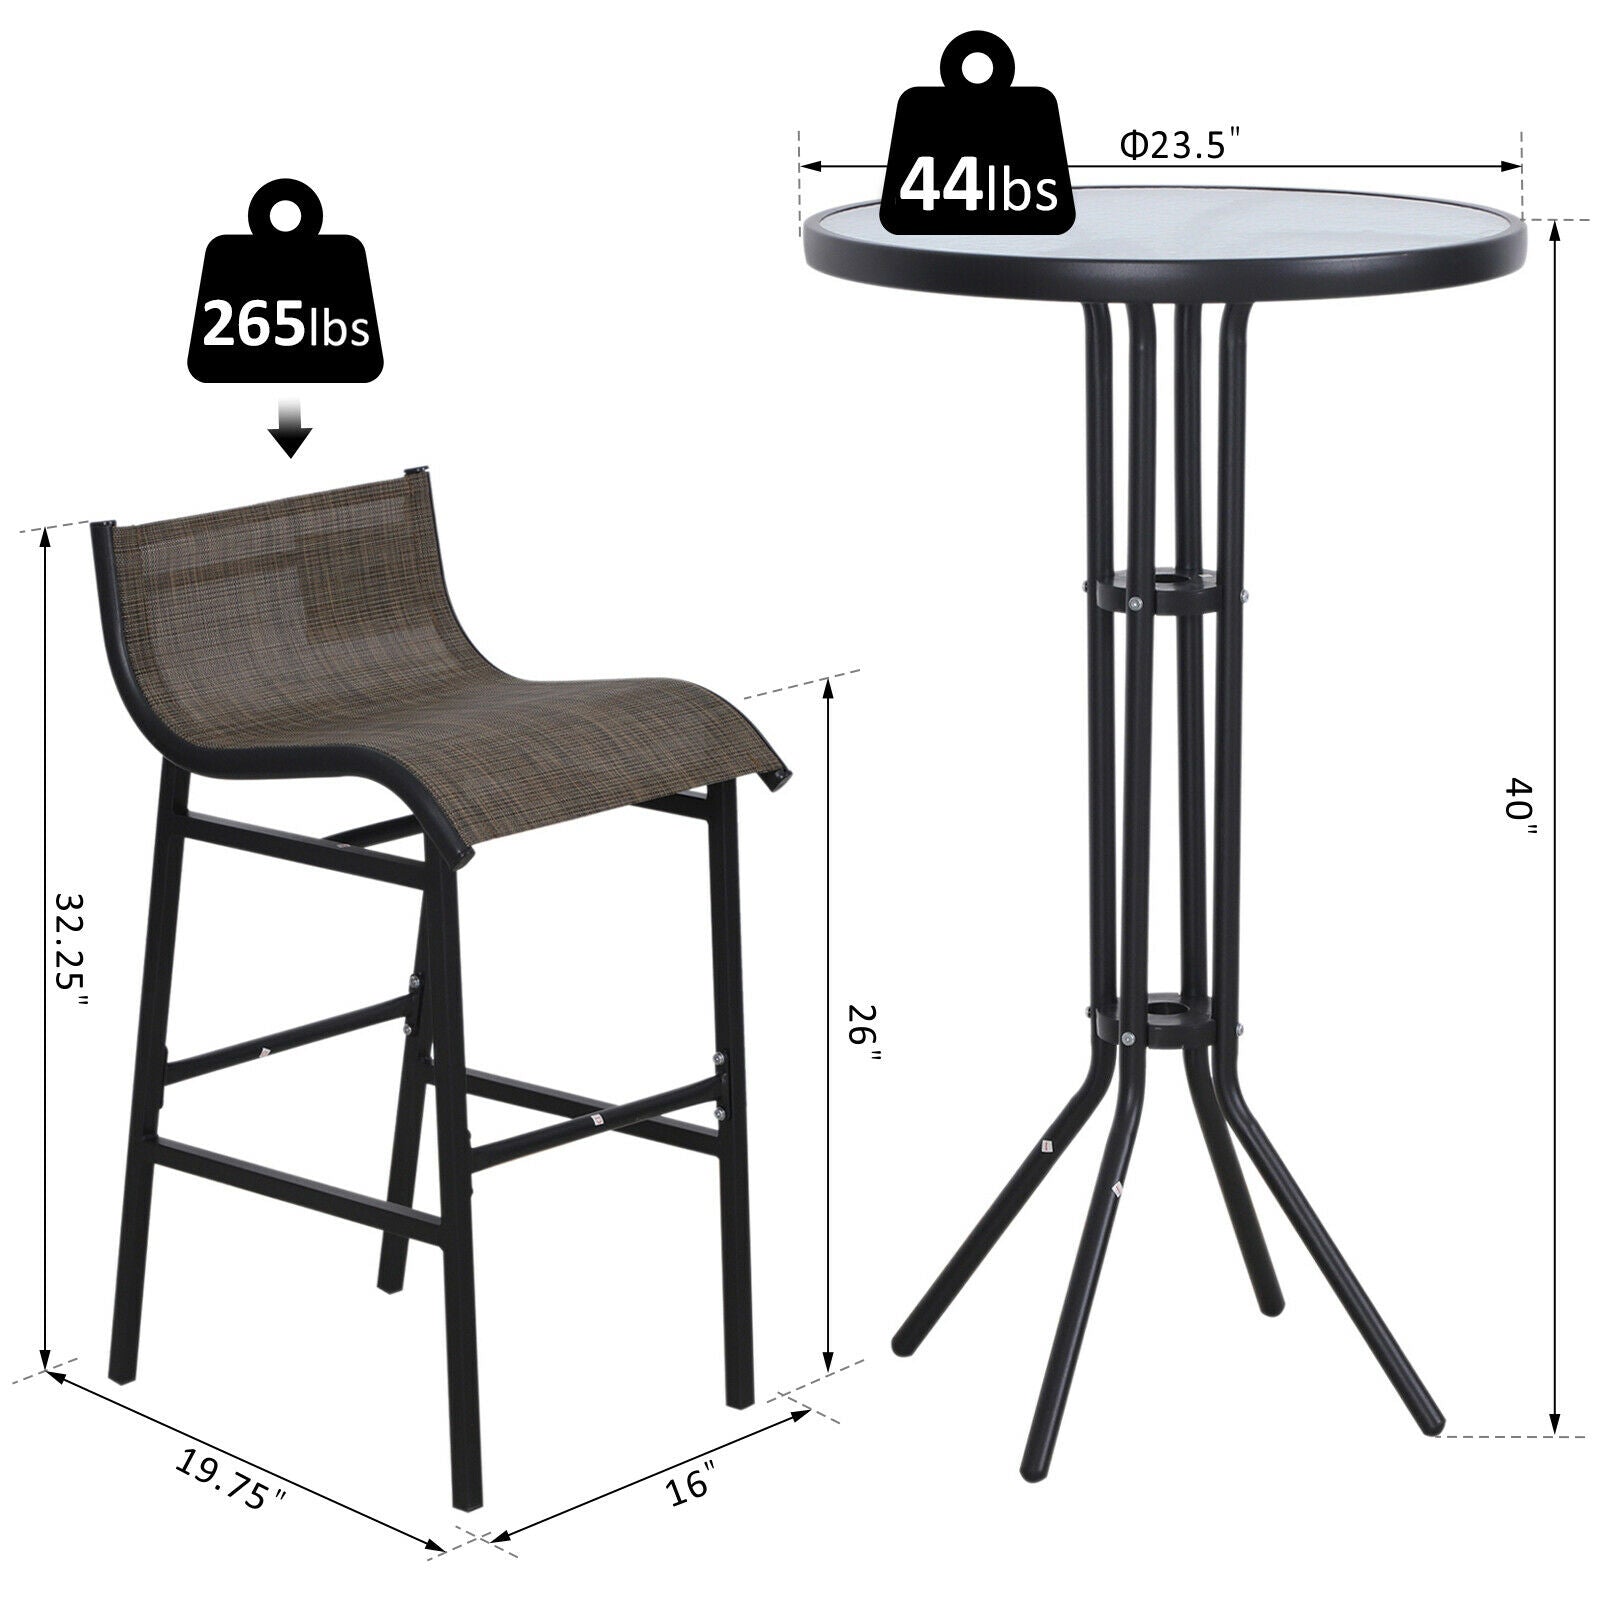 Outdoor Bar Table and Chairs - 3 Pc Patio Bistro Set